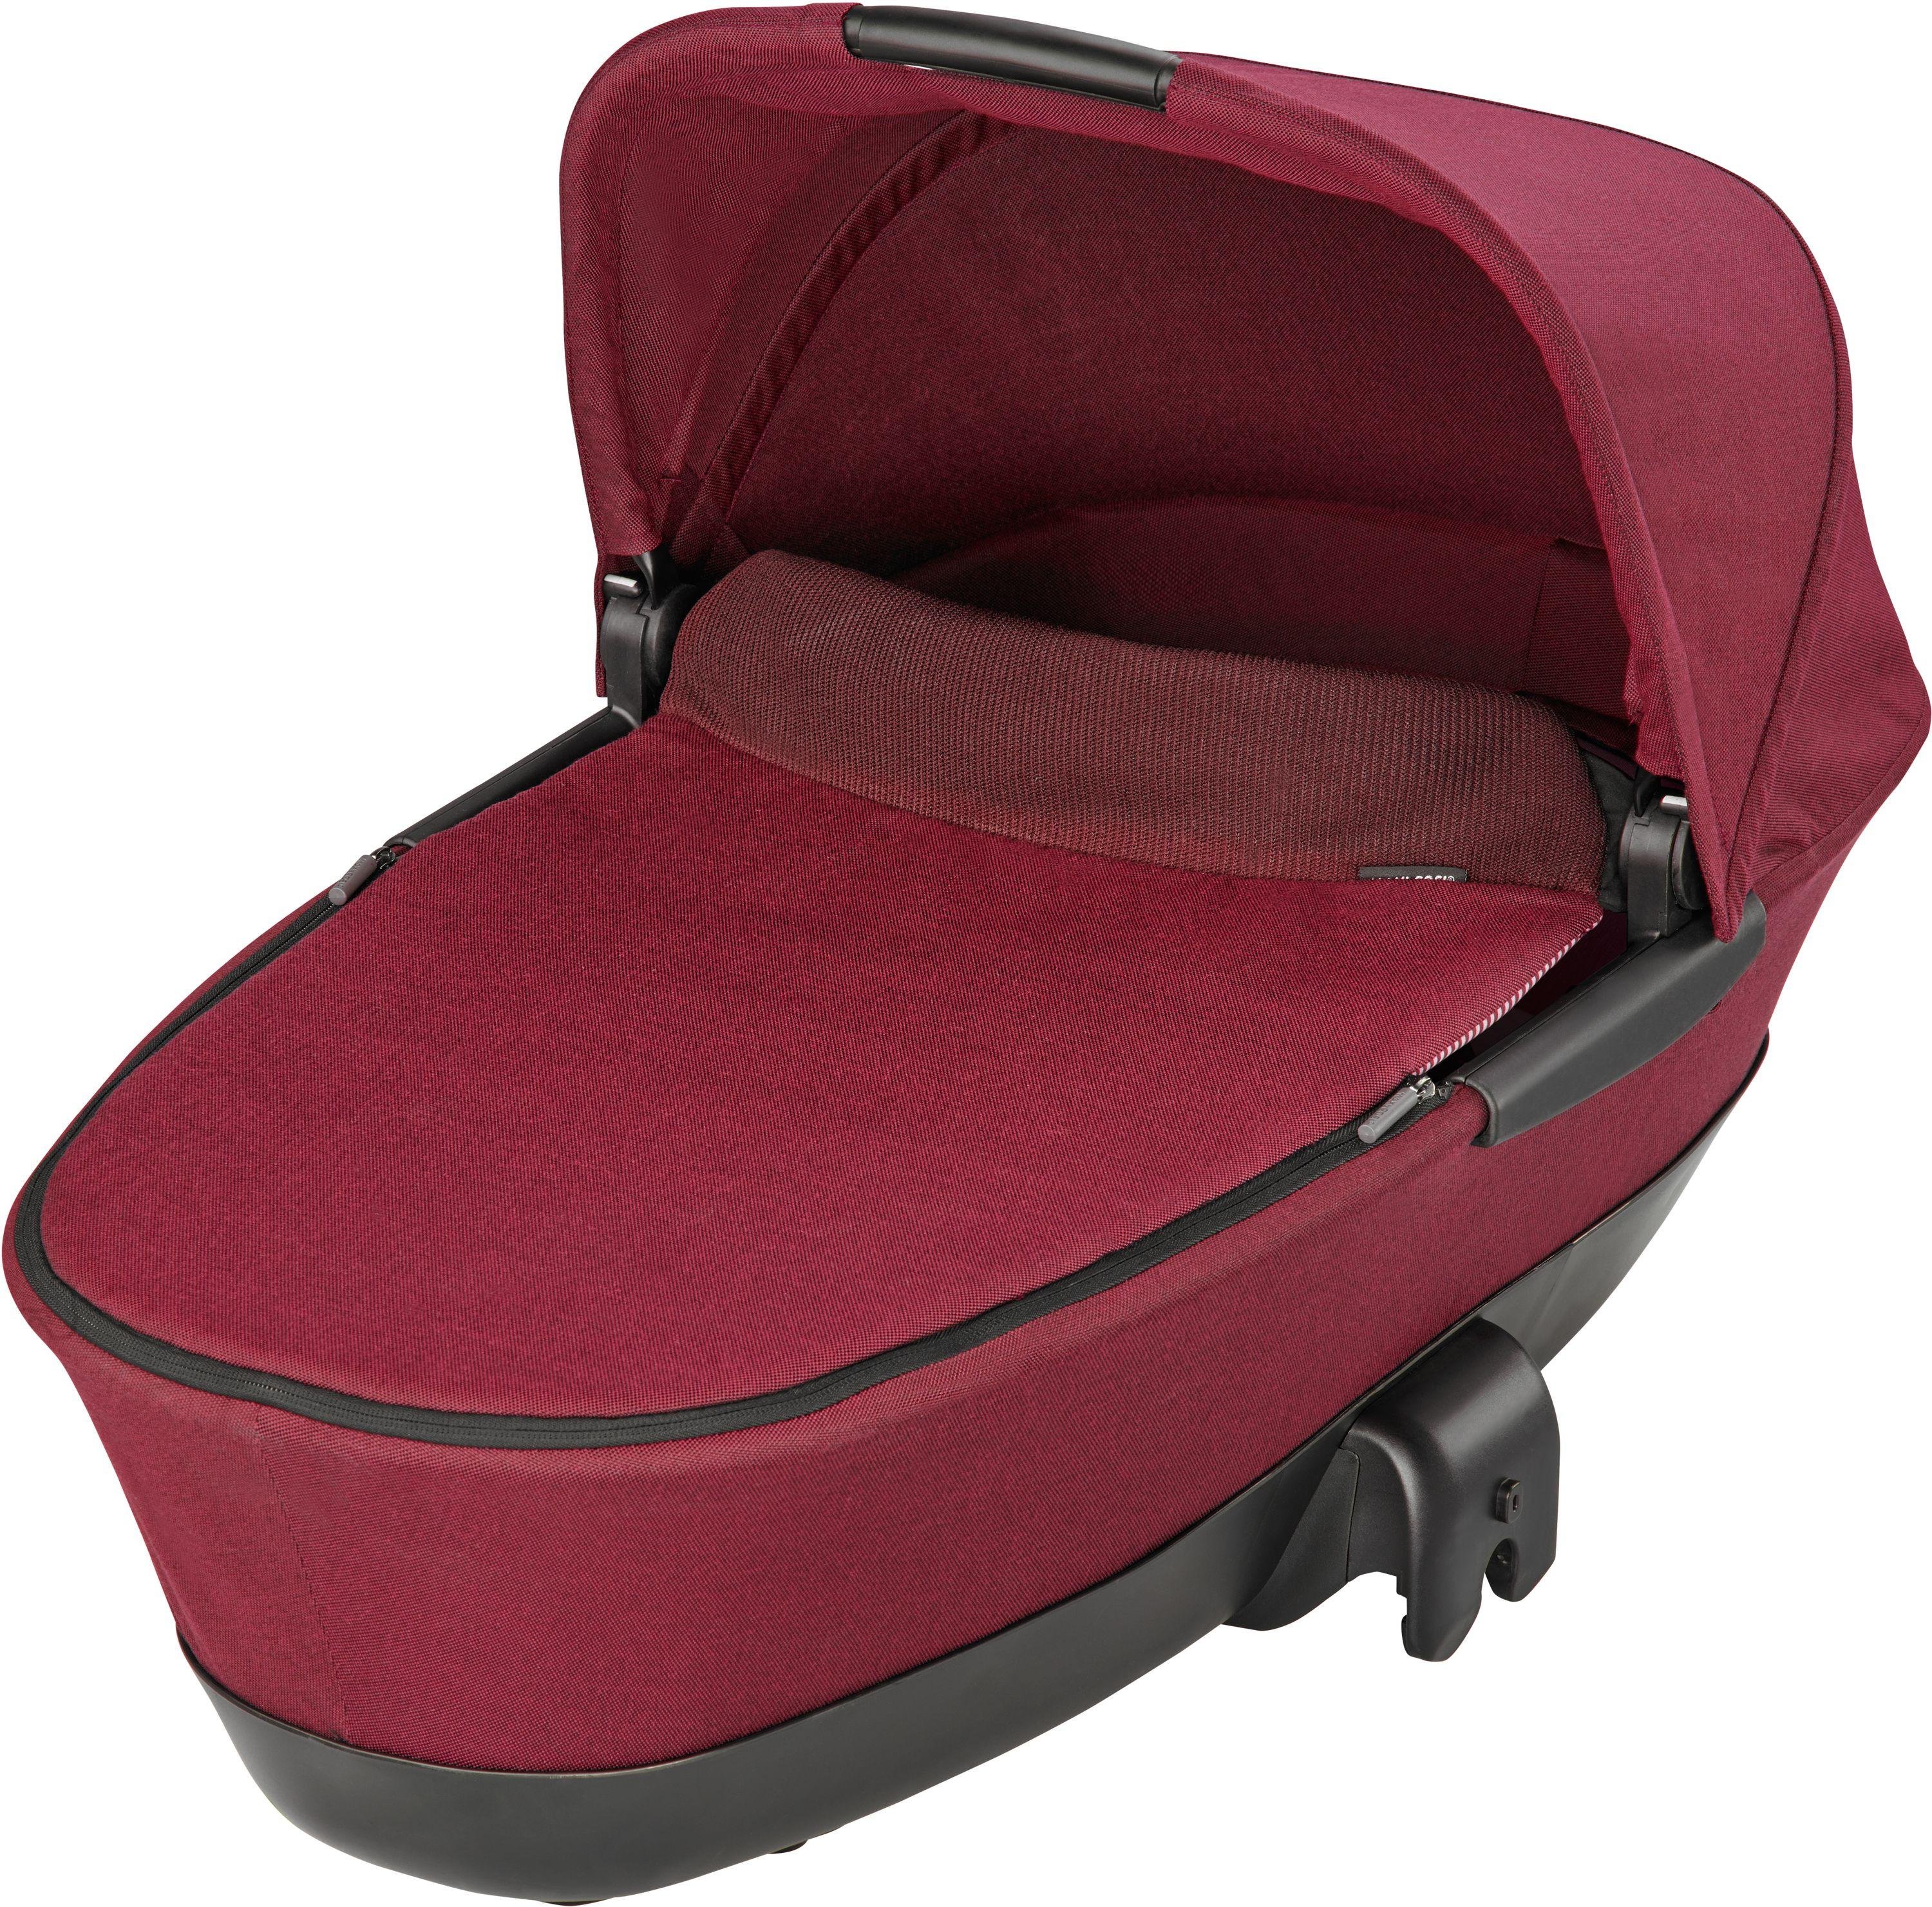 Maxi-Cosi Foldable Carrycot - Robin Red